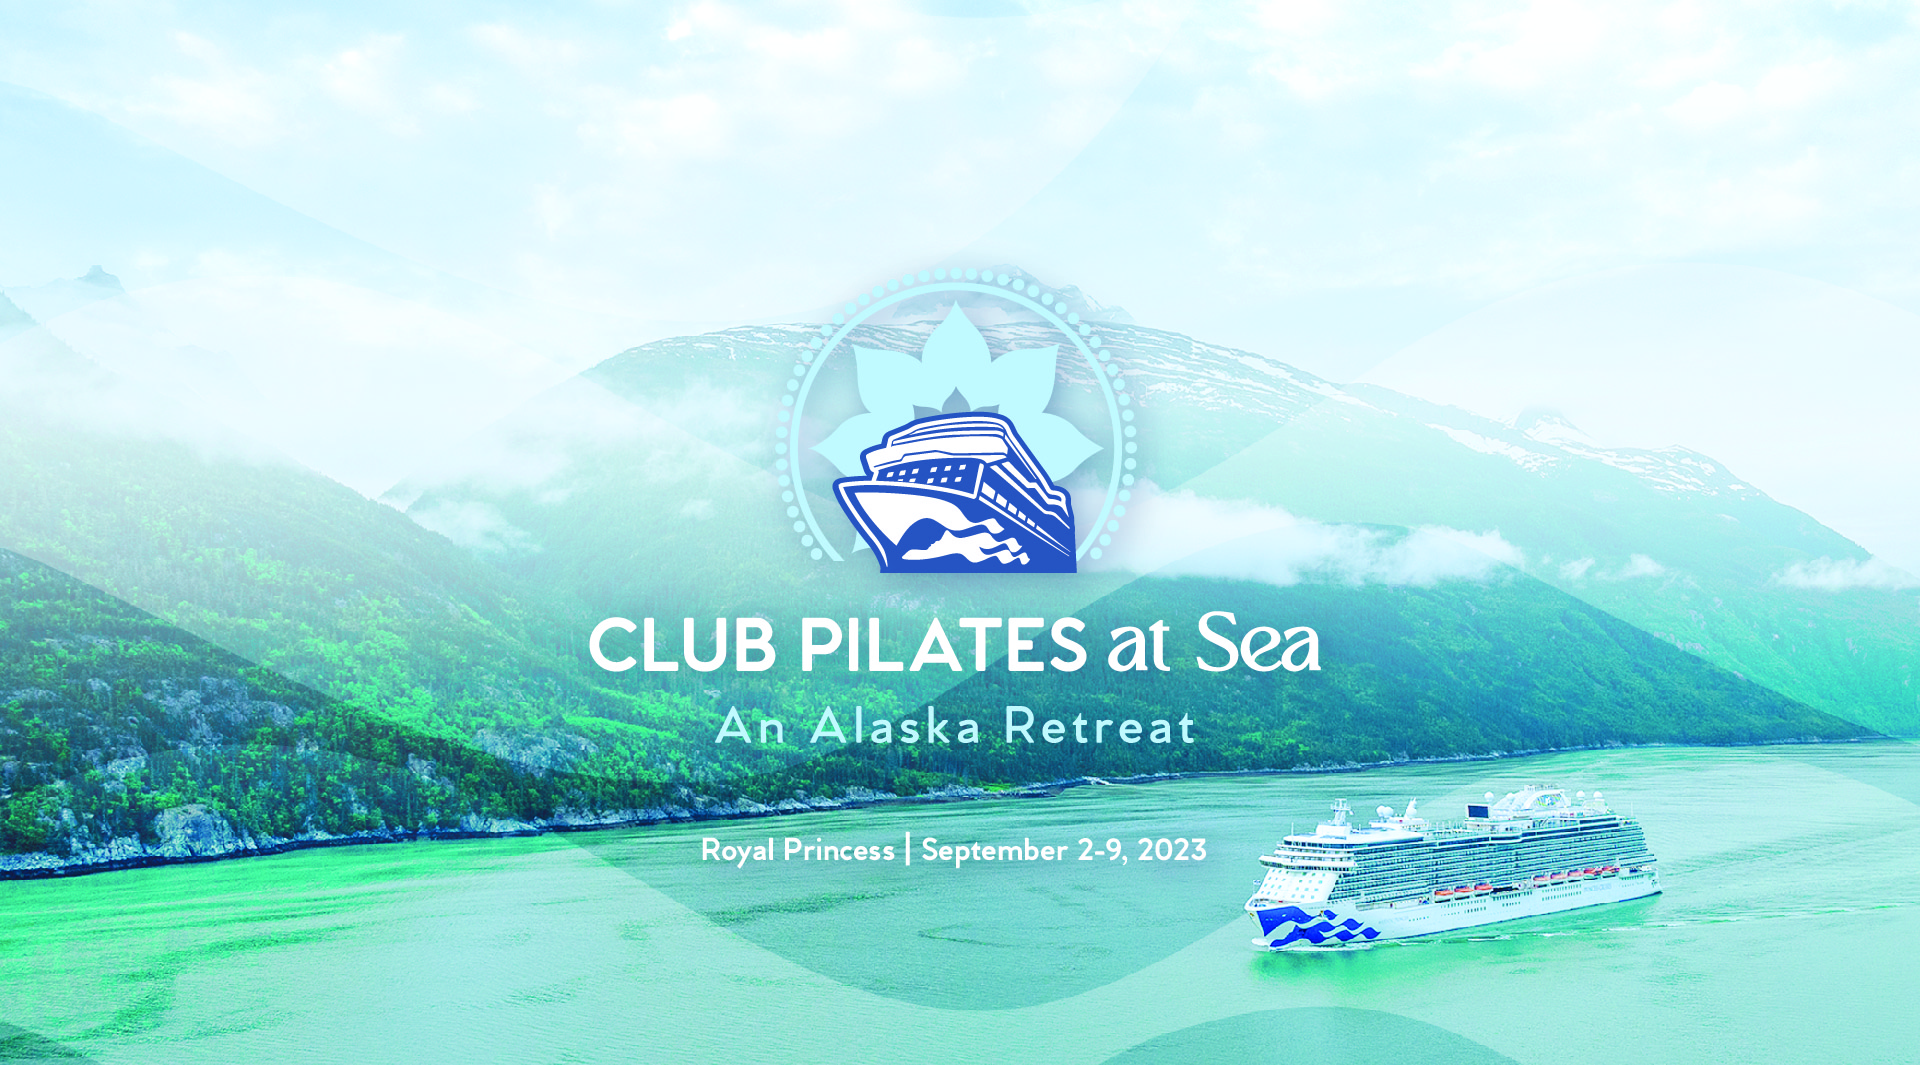 Experience a Club Pilates Retreat at Sea this Labor Day on the Royal Princess